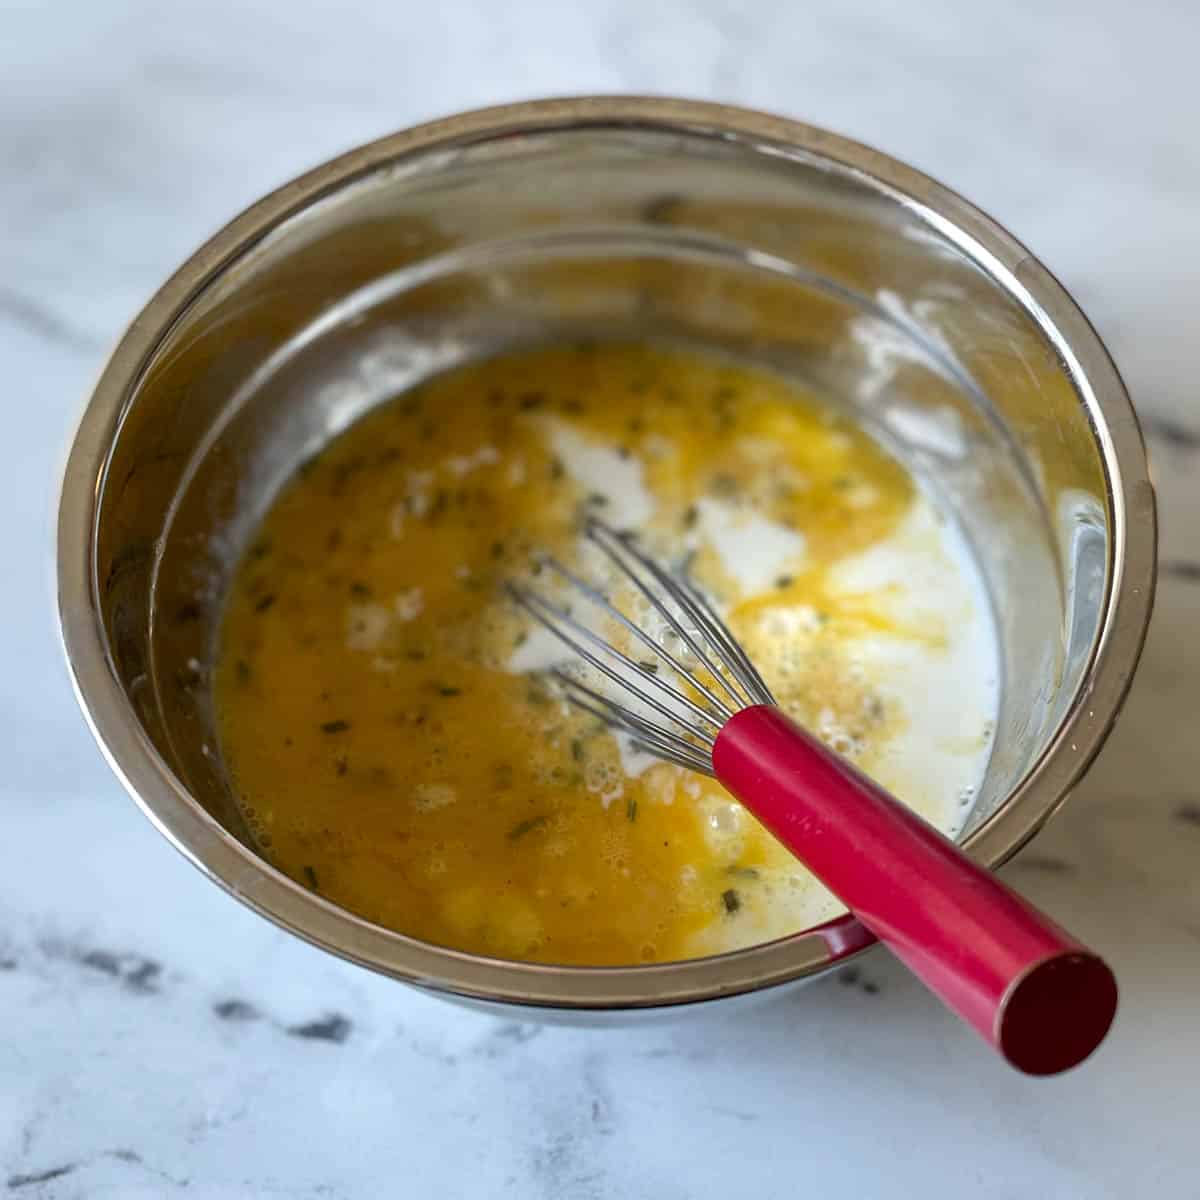 Beaten egg, milk, and chopped rosemary are shown in a metal bowl with a red whisk.